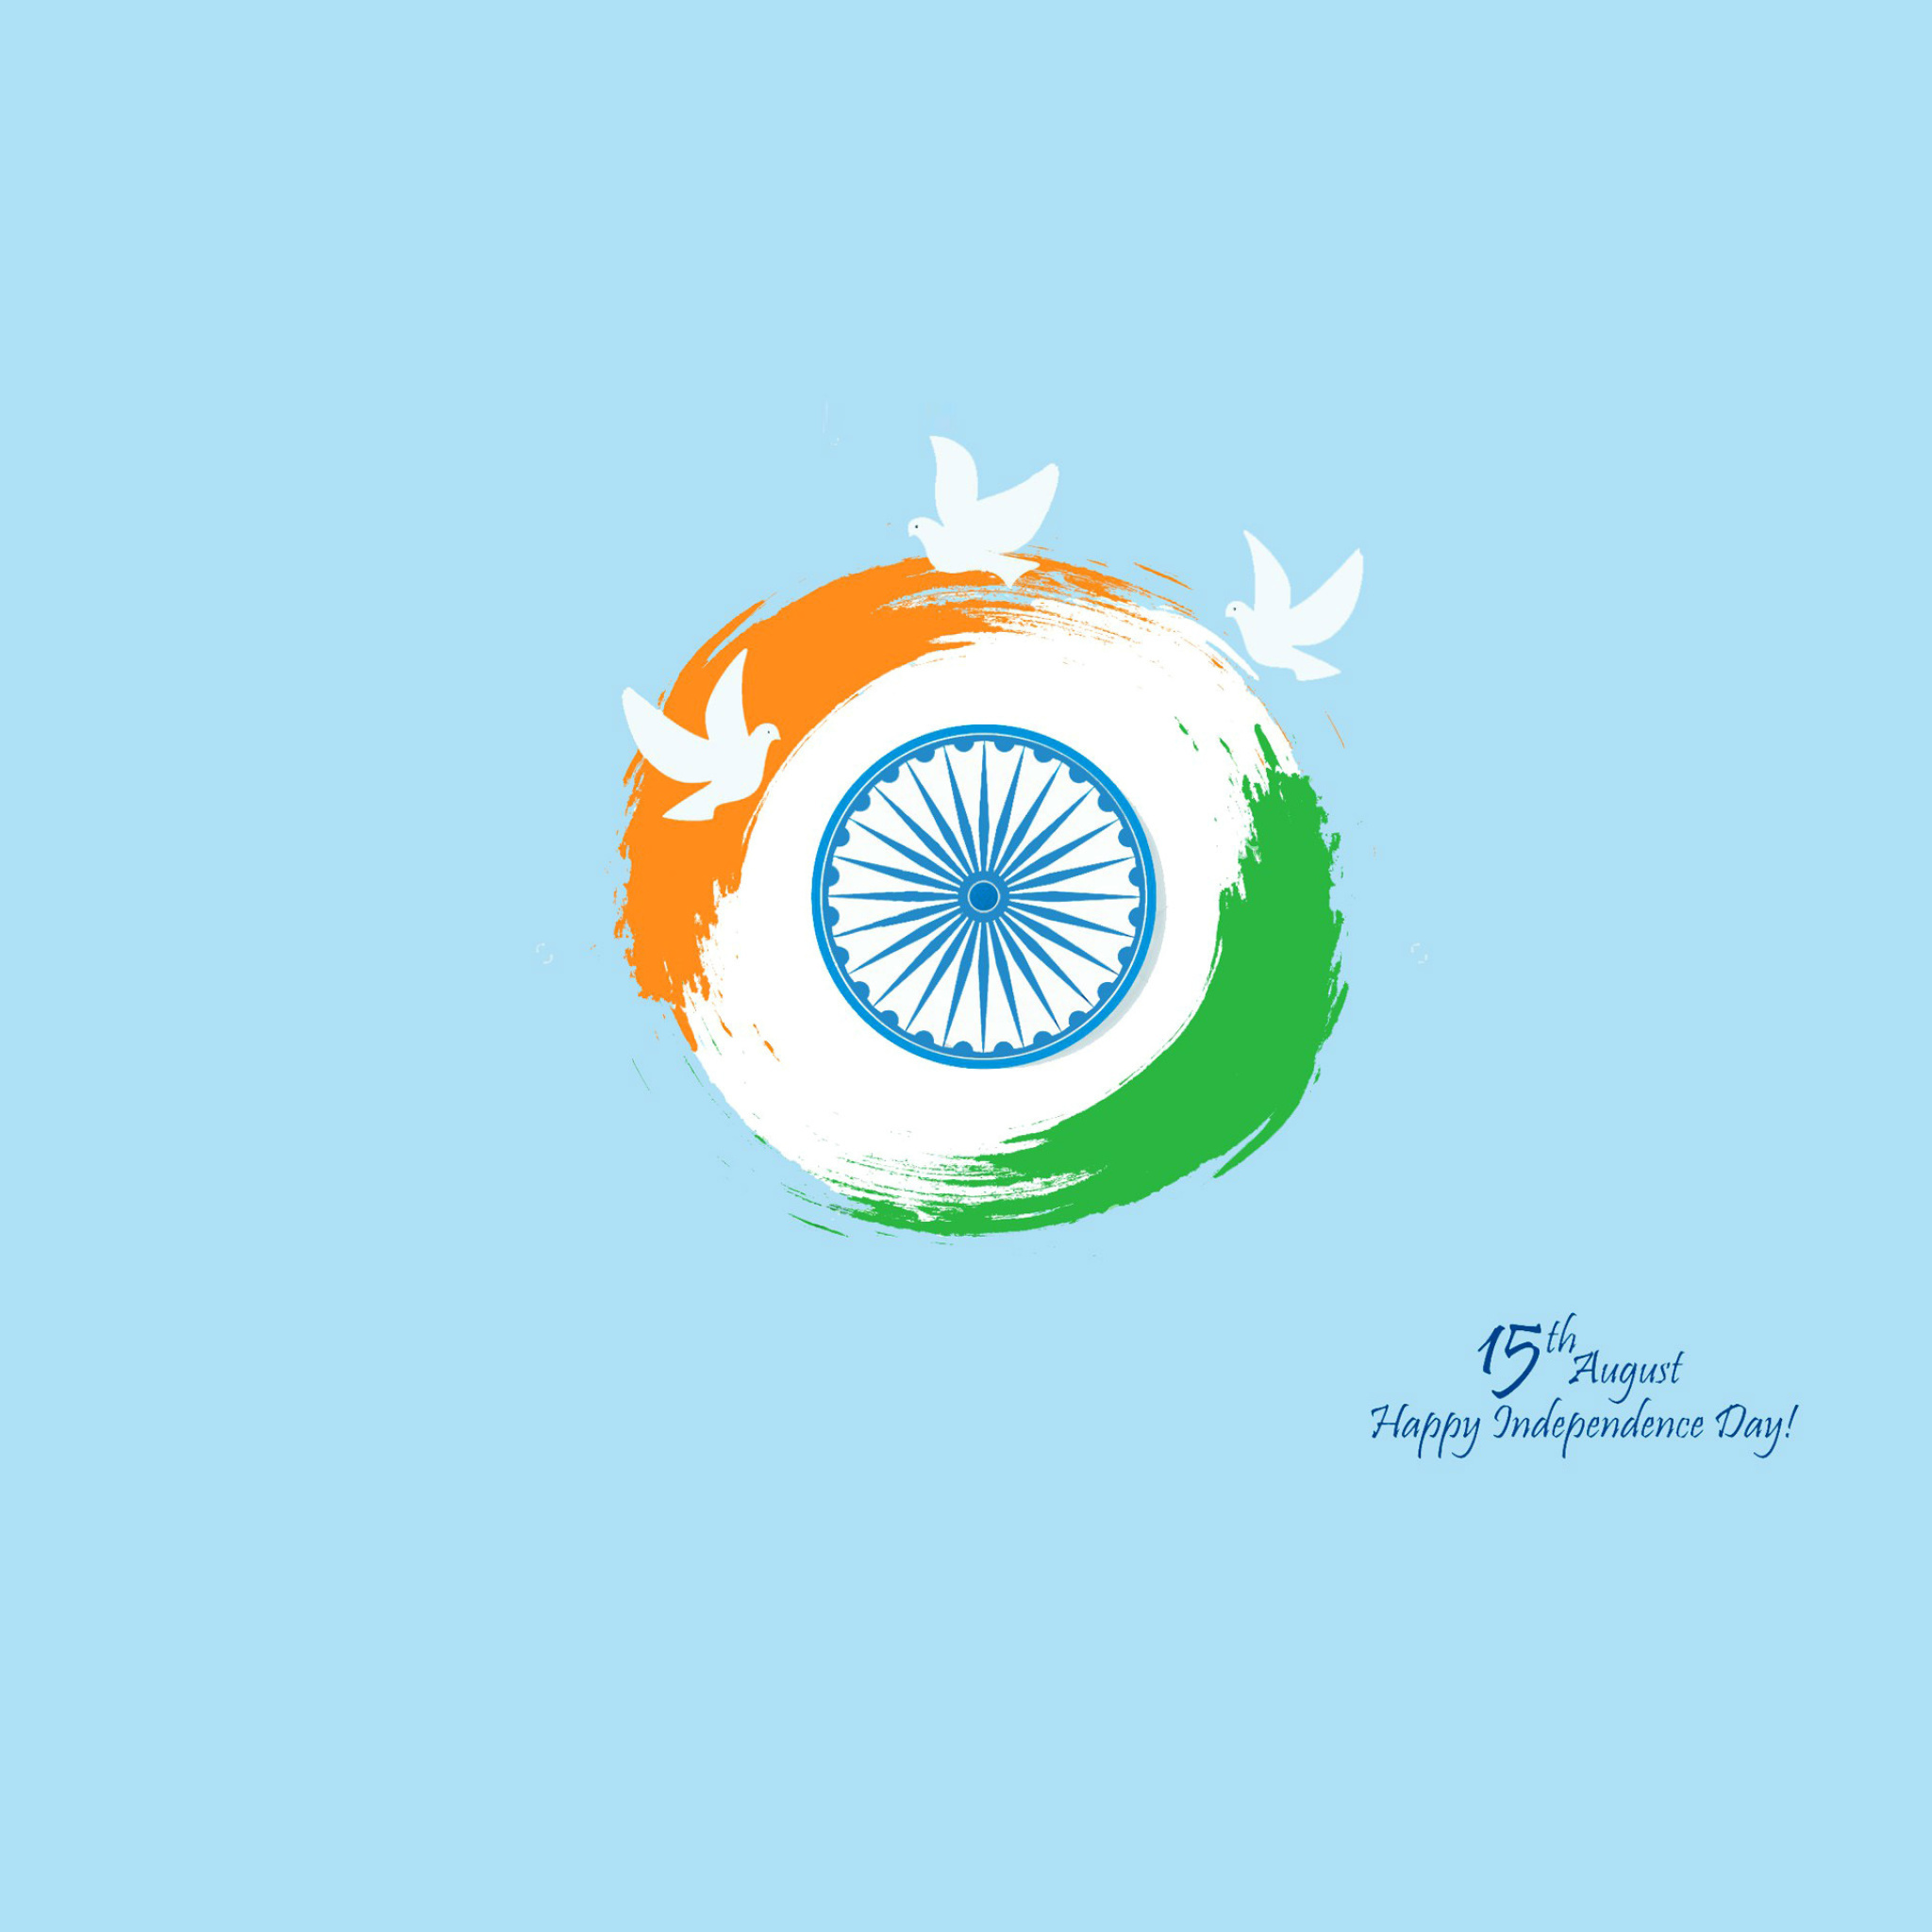 Обои 15th August Indian Independence Day 2048x2048